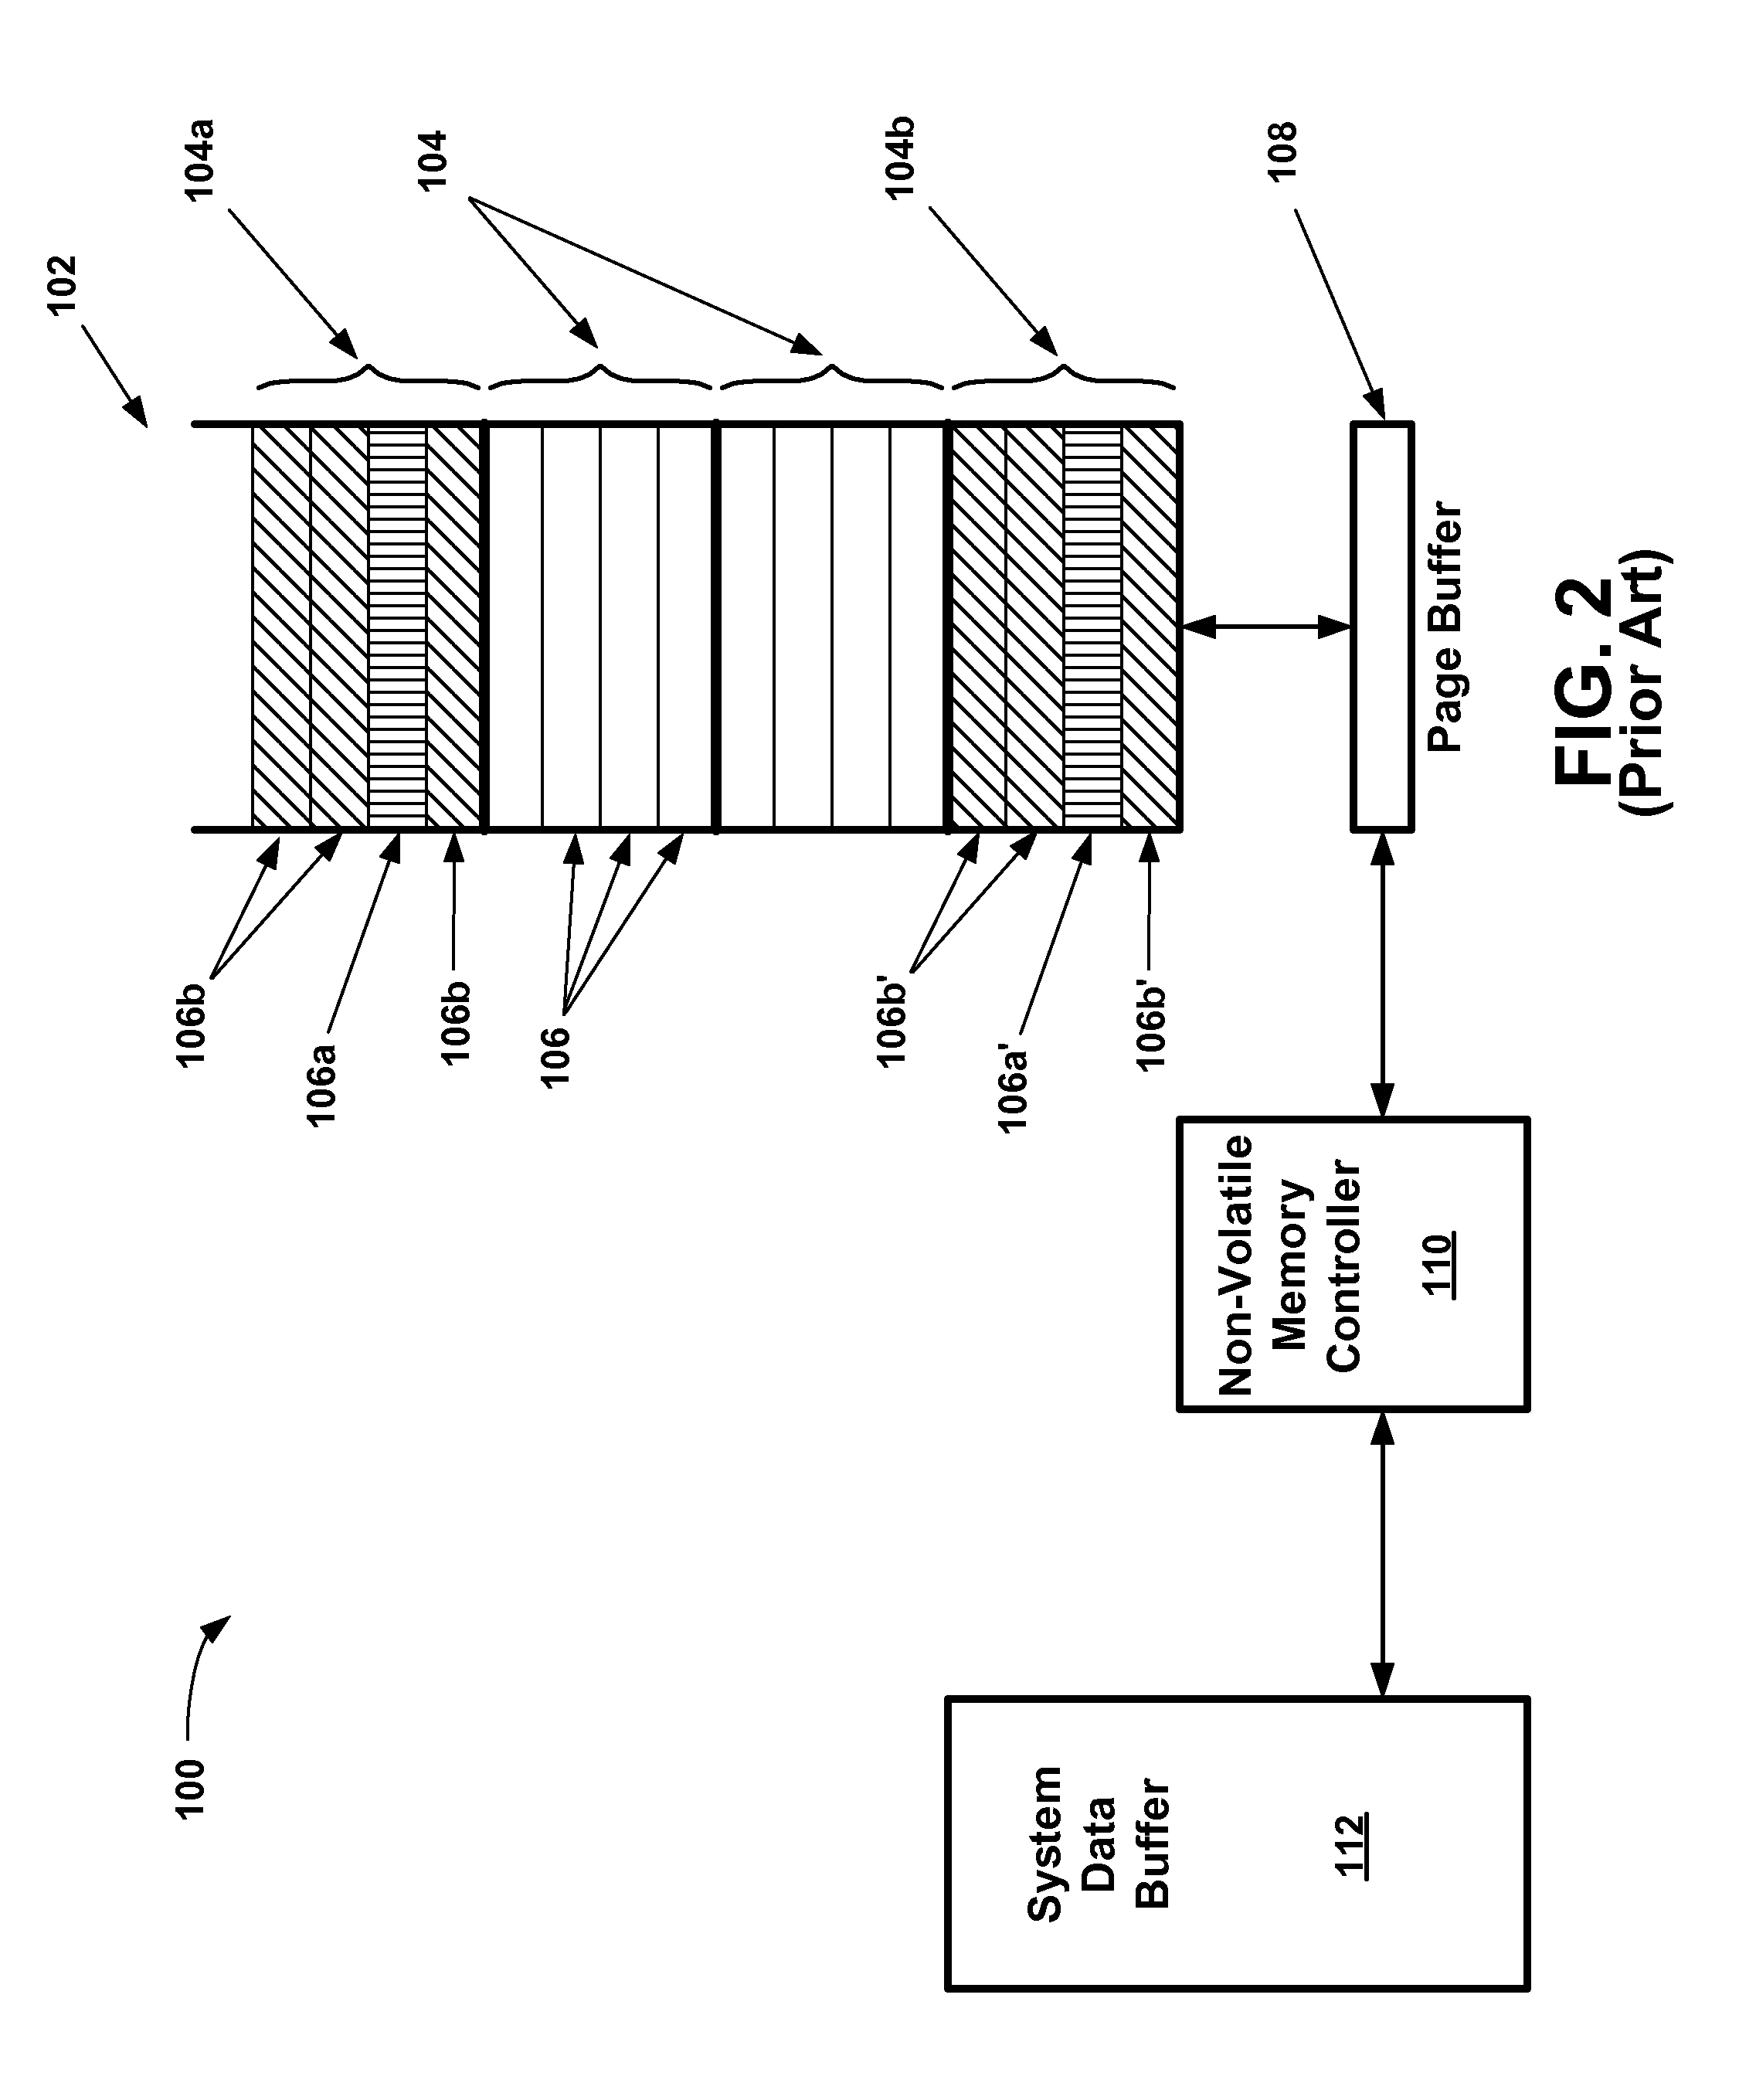 System and method for providing copyback data integrity in a non-volatile memory system